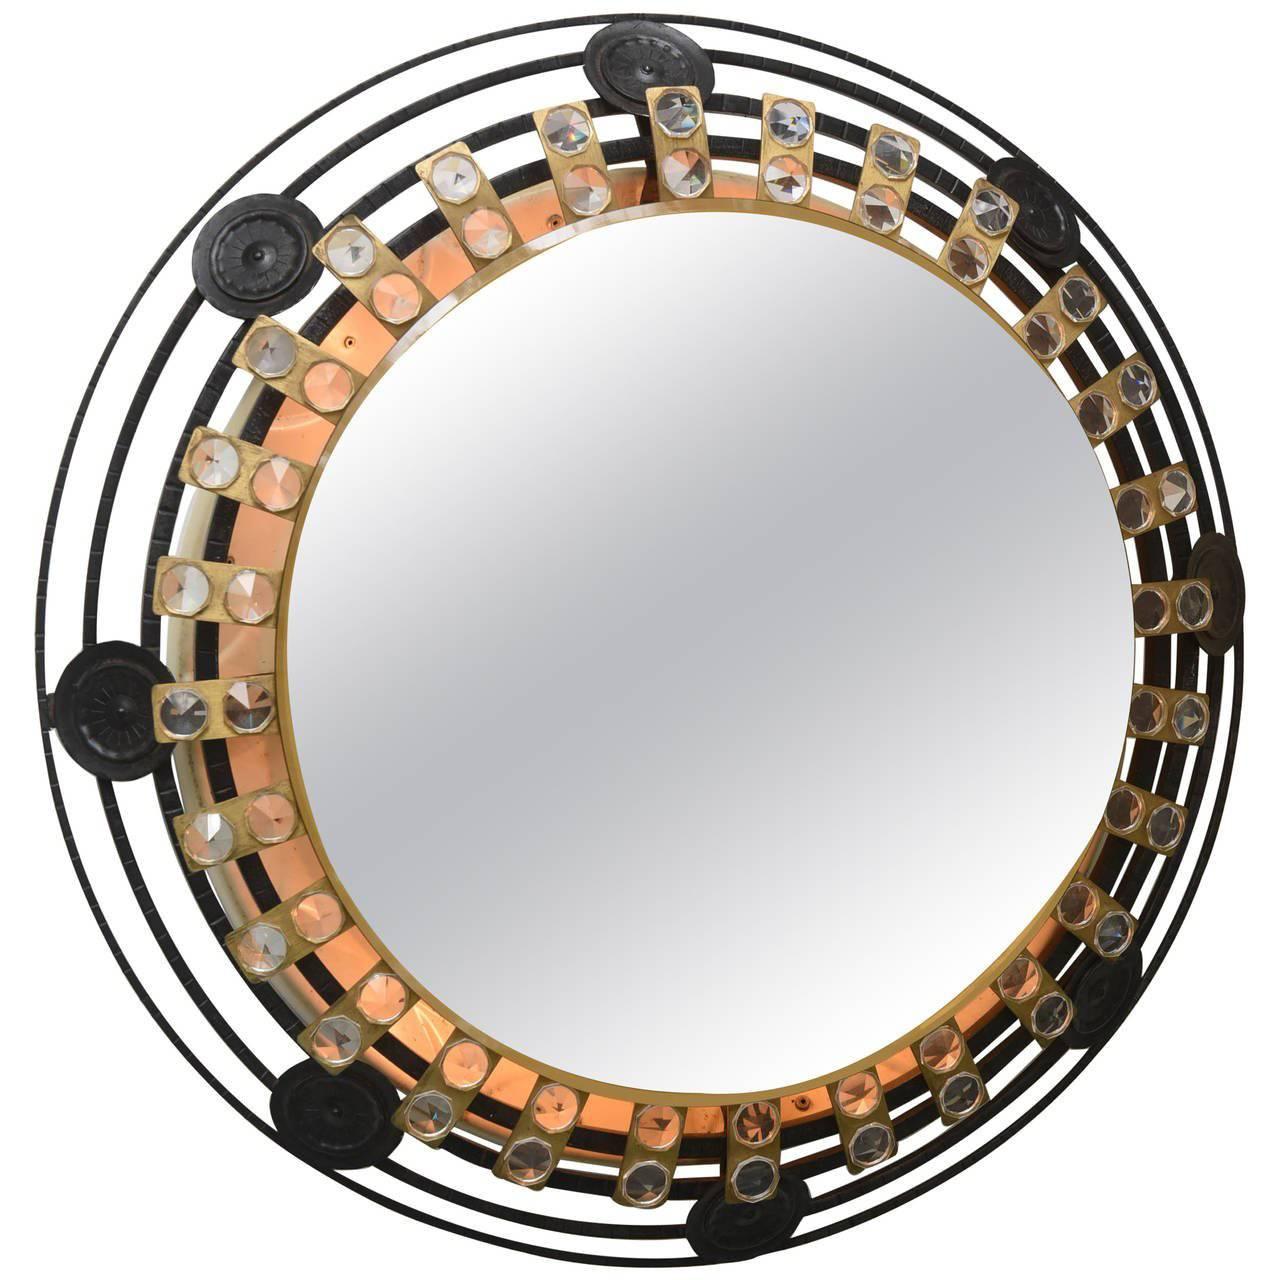 Illuminated Brutalist Mirror, Germany, 1960s For Sale